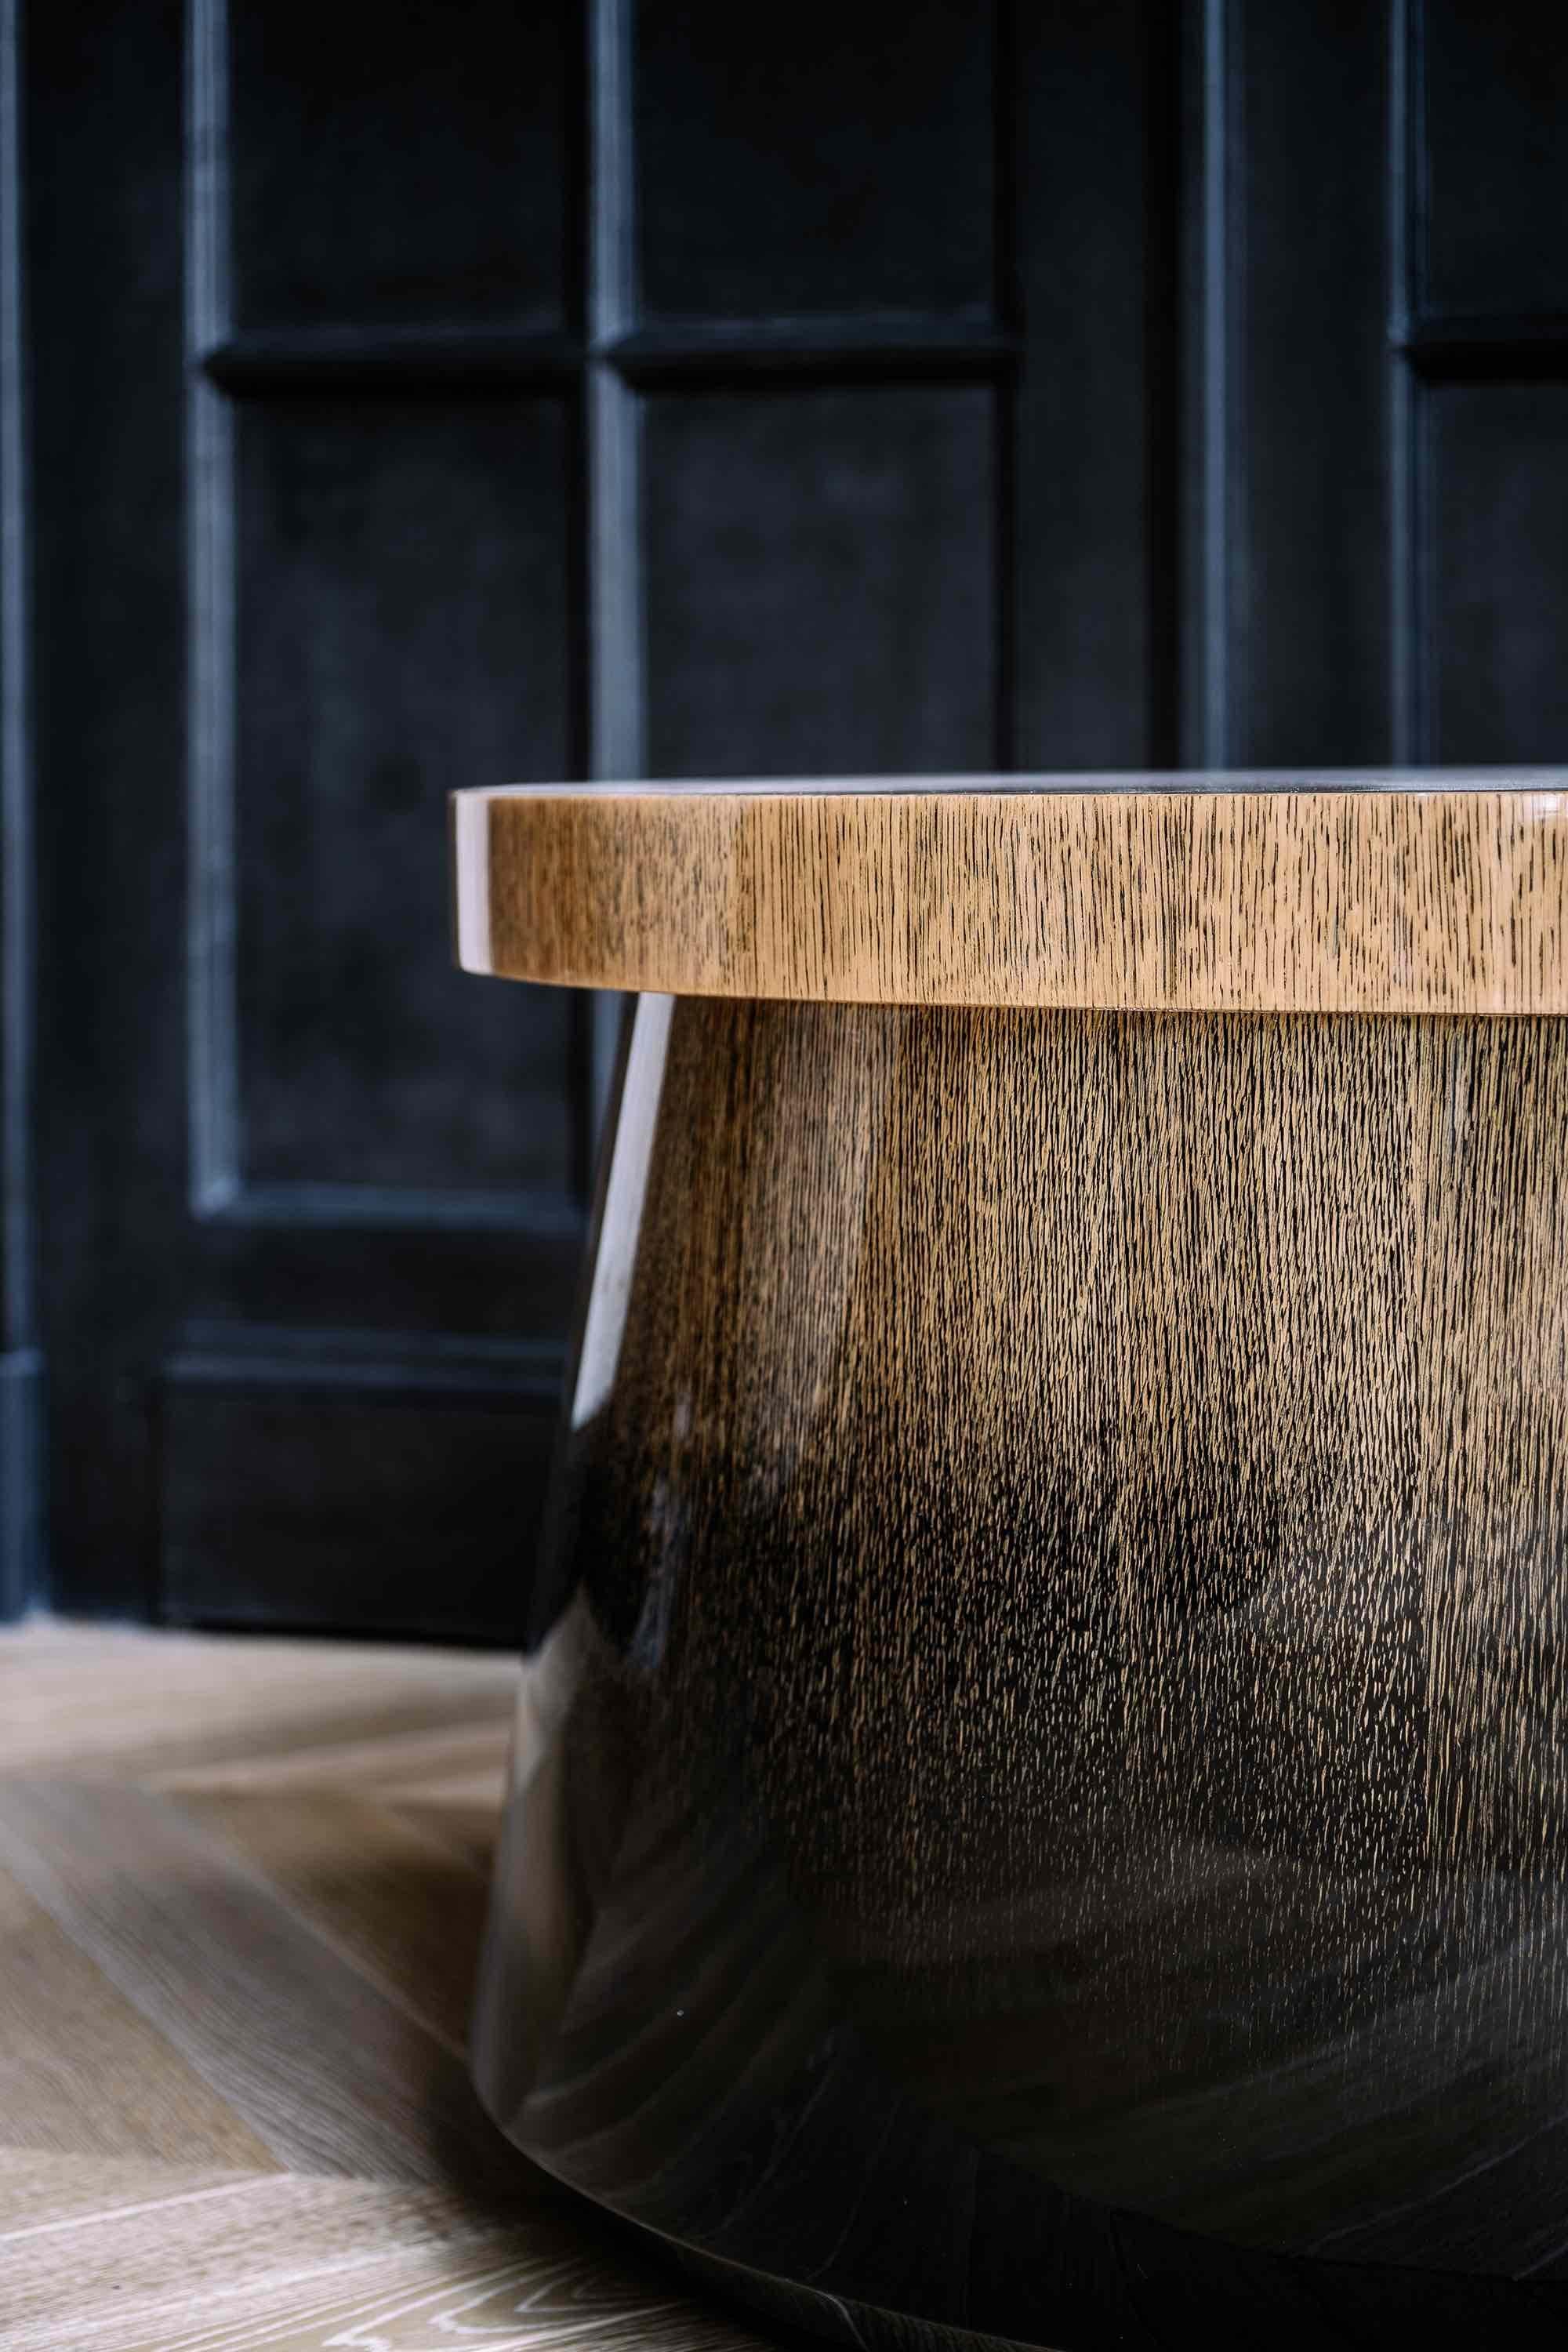 Temple coffee table, by Tristan Auer, is made in Light oak degraded with ink and covered with a glossy varnish.
Dimensions : 31,4